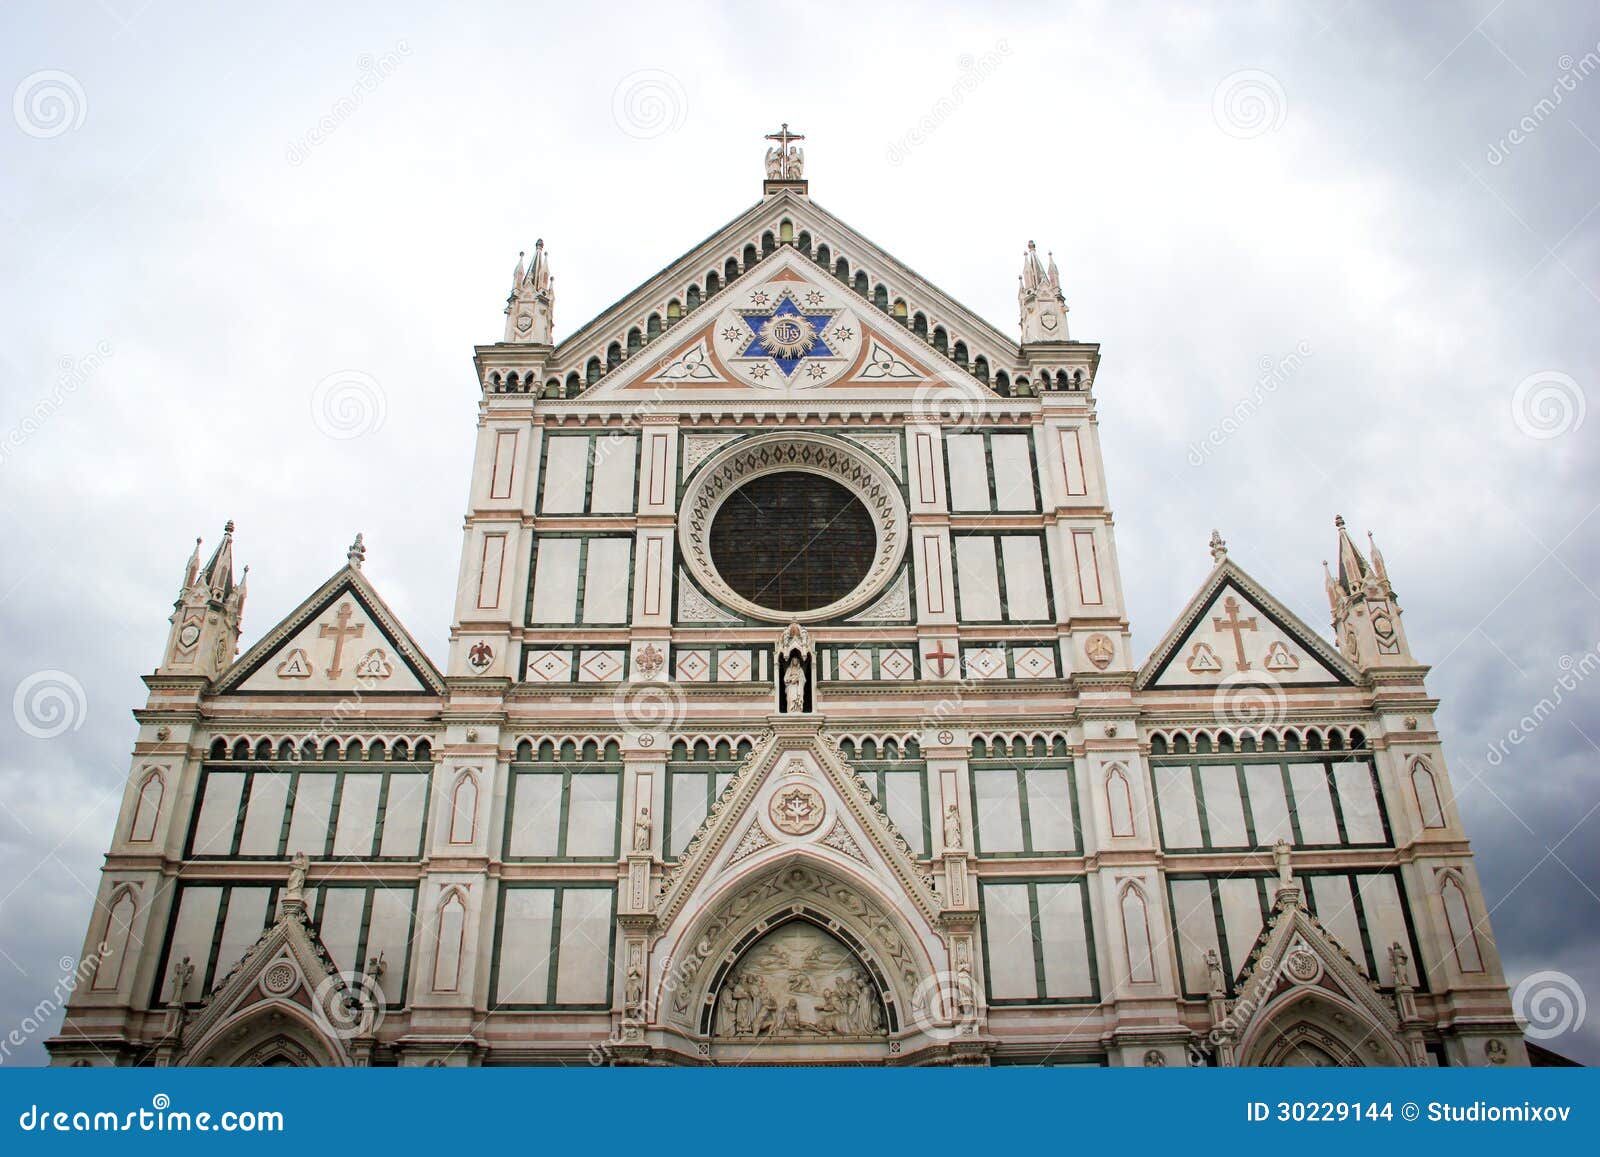 the basilica di santa croce (basilica of the holy cross) in florence, italy